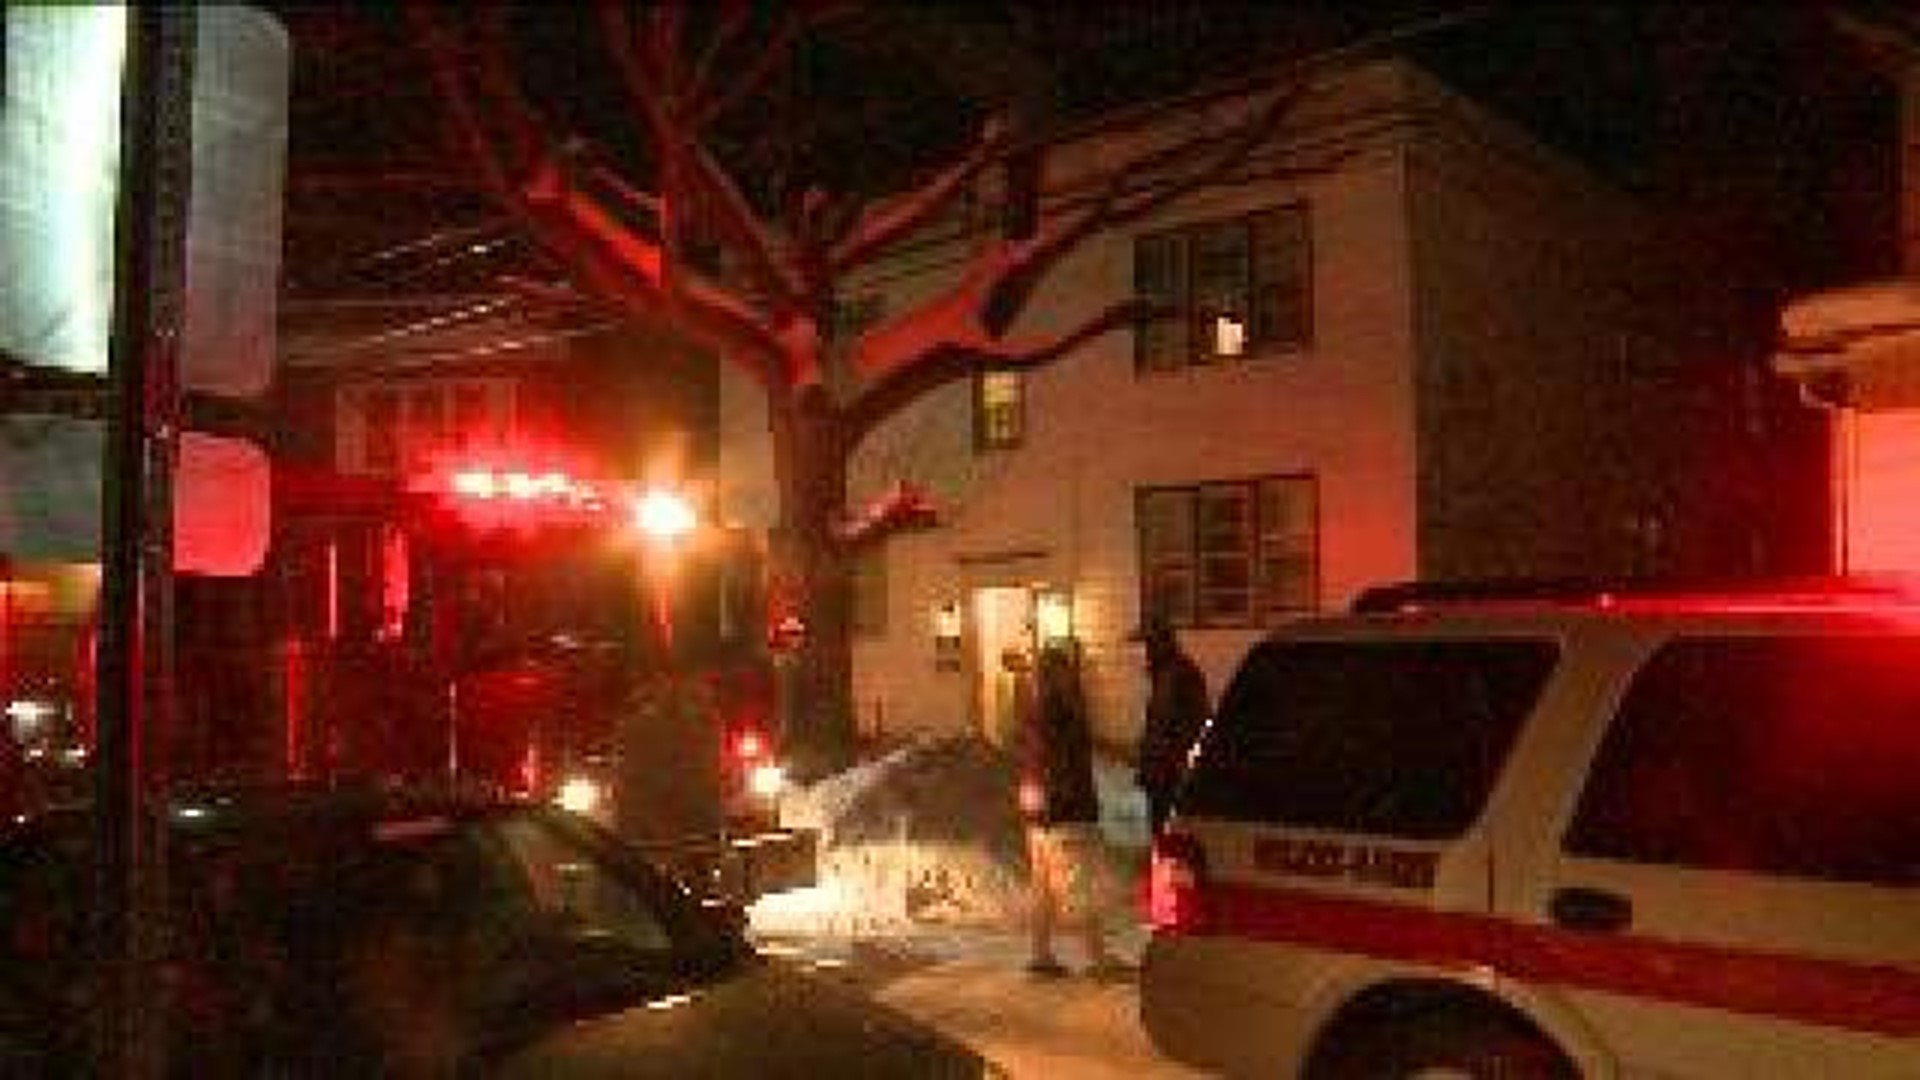 Fire Forces Residents Out into Cold Weather